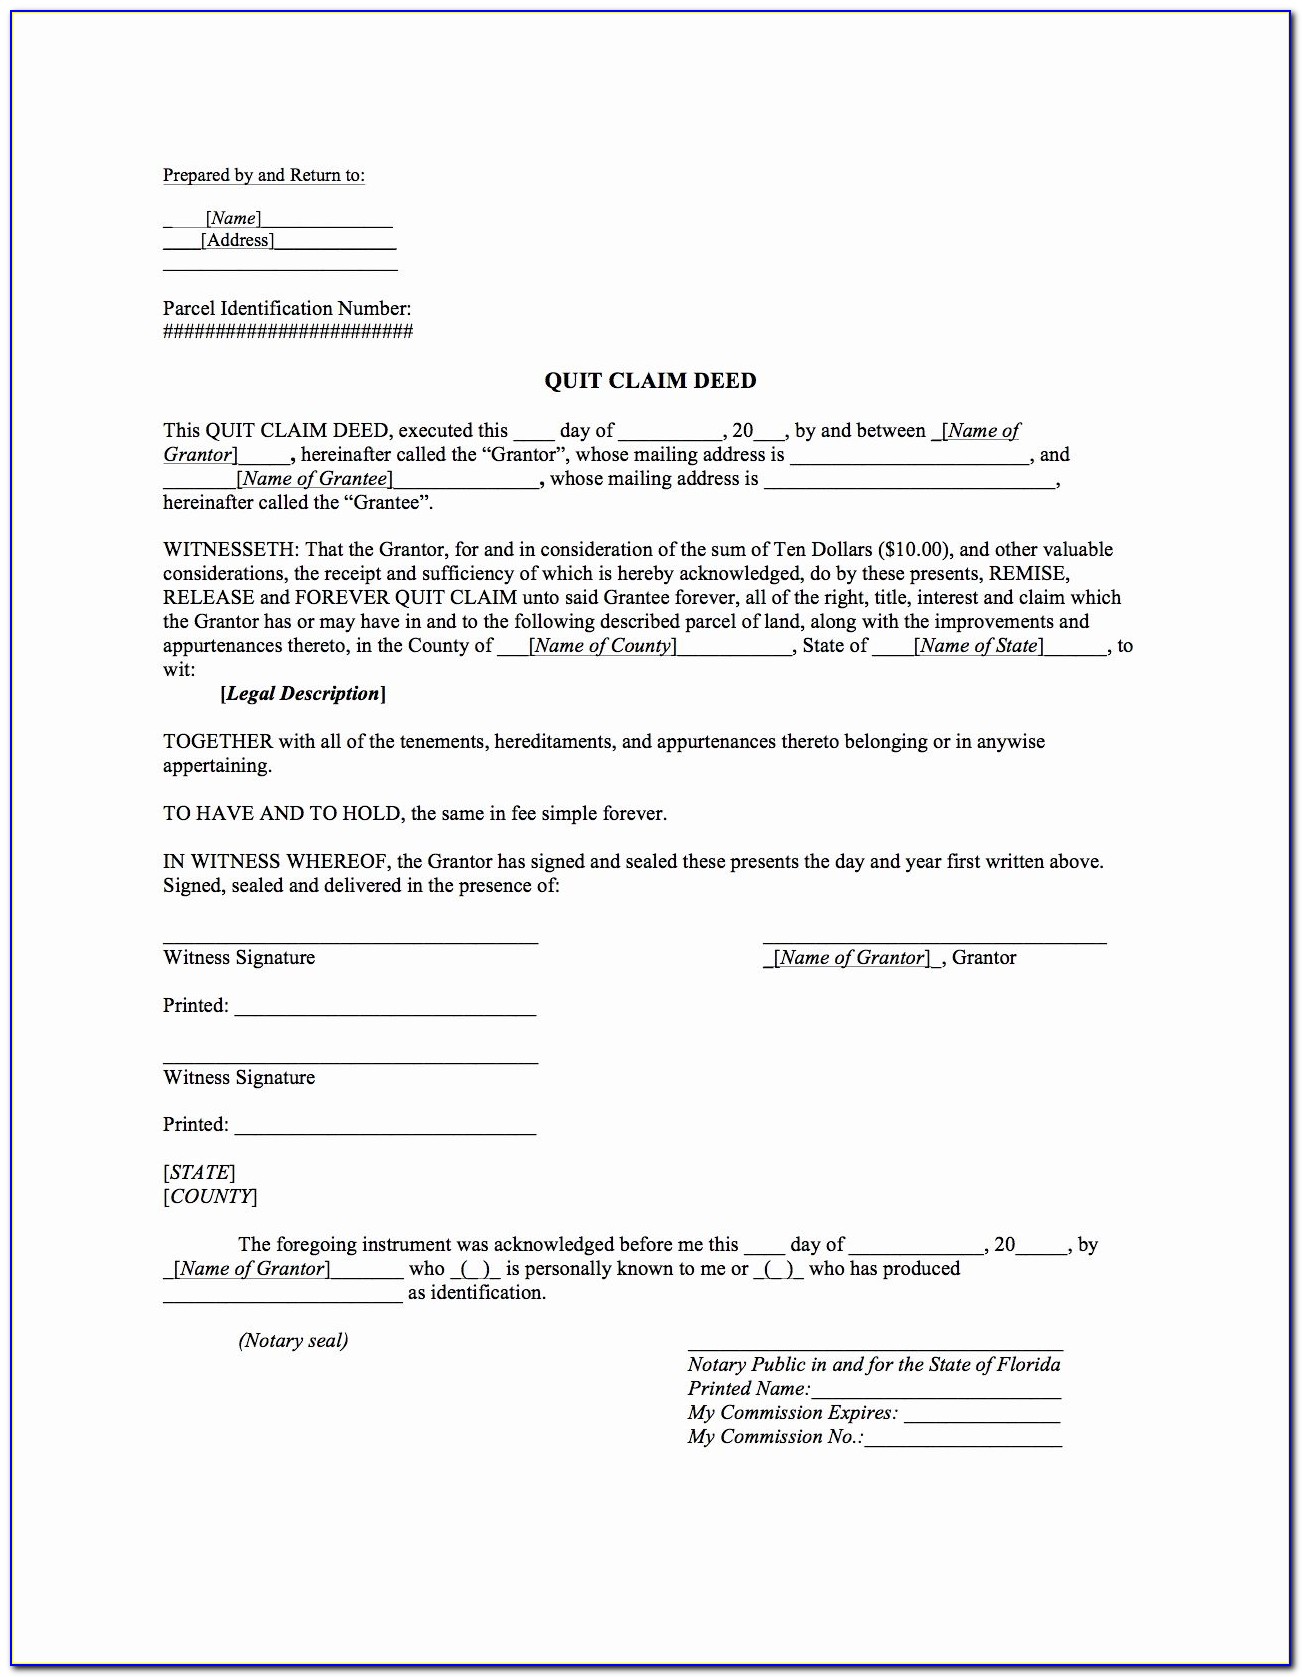 Quitclaim Deed Template Awesome Quit Claim Deed Template ? Boardwalk Legal Aids